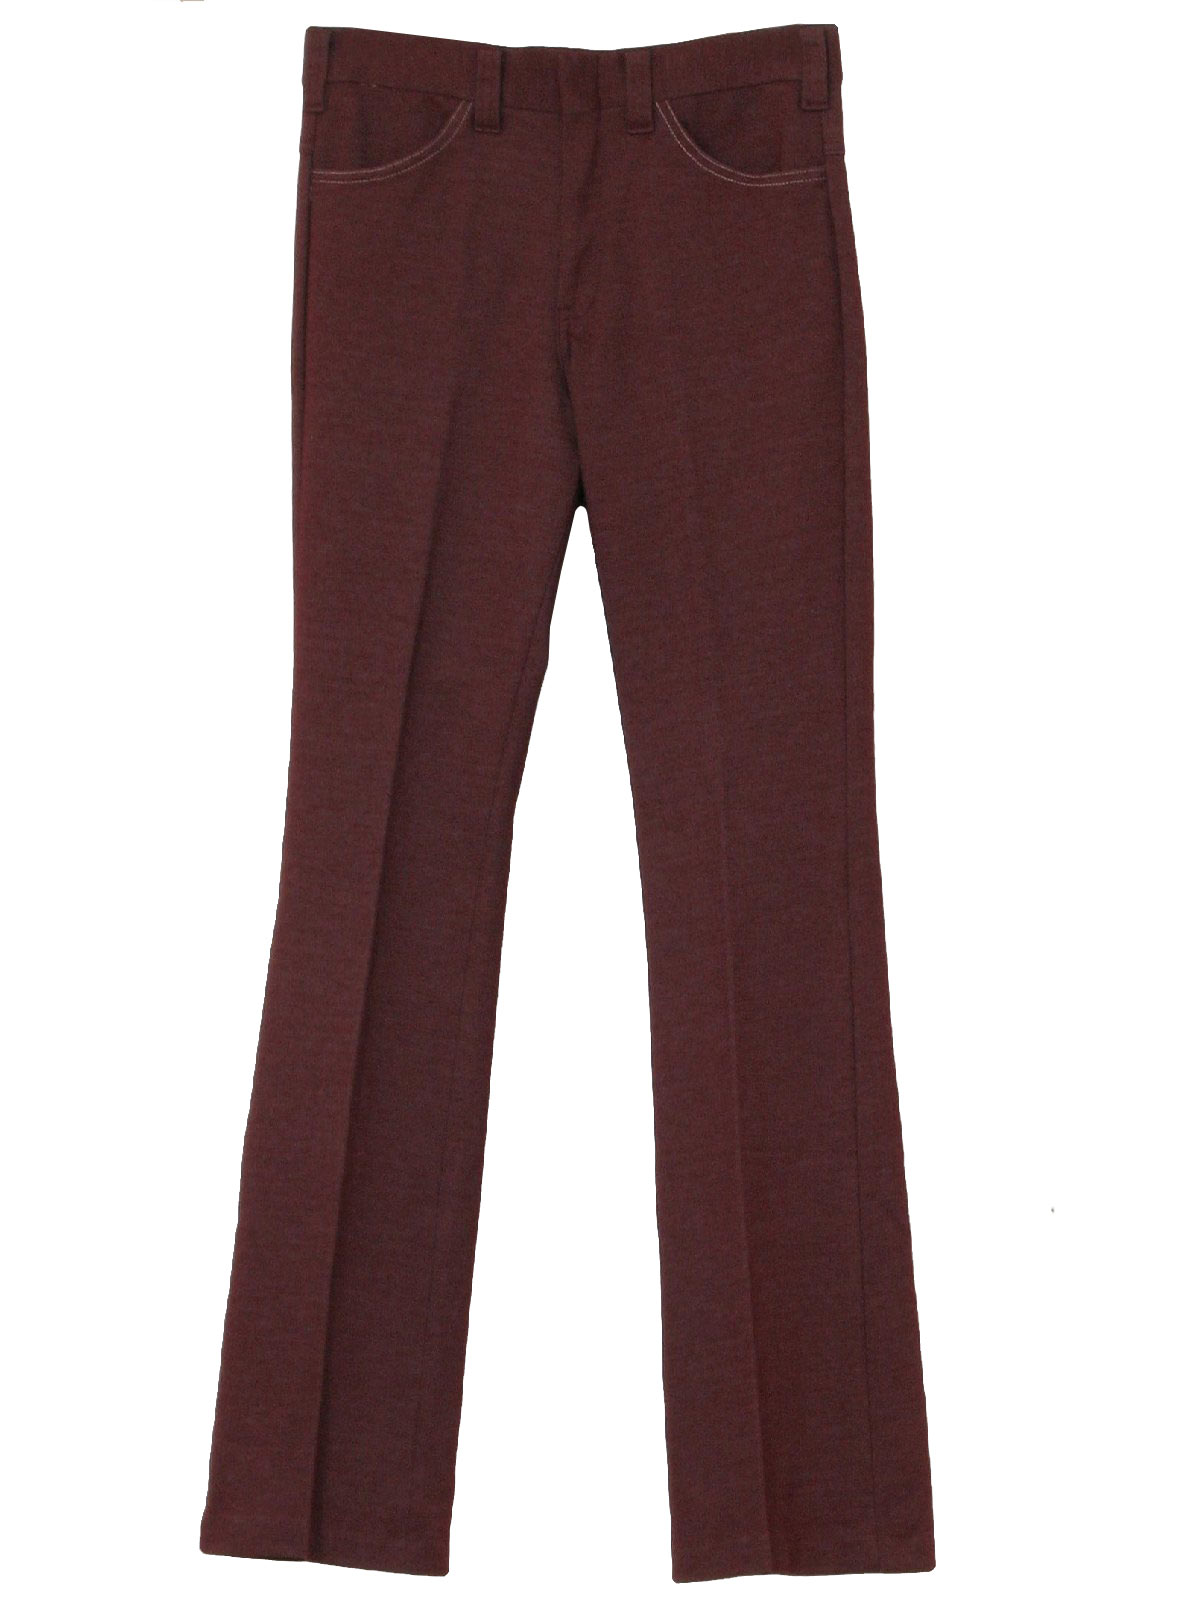 60s Retro Pants: Late 60s or early 70s -Lee Fastbacks- Mens wine and ...